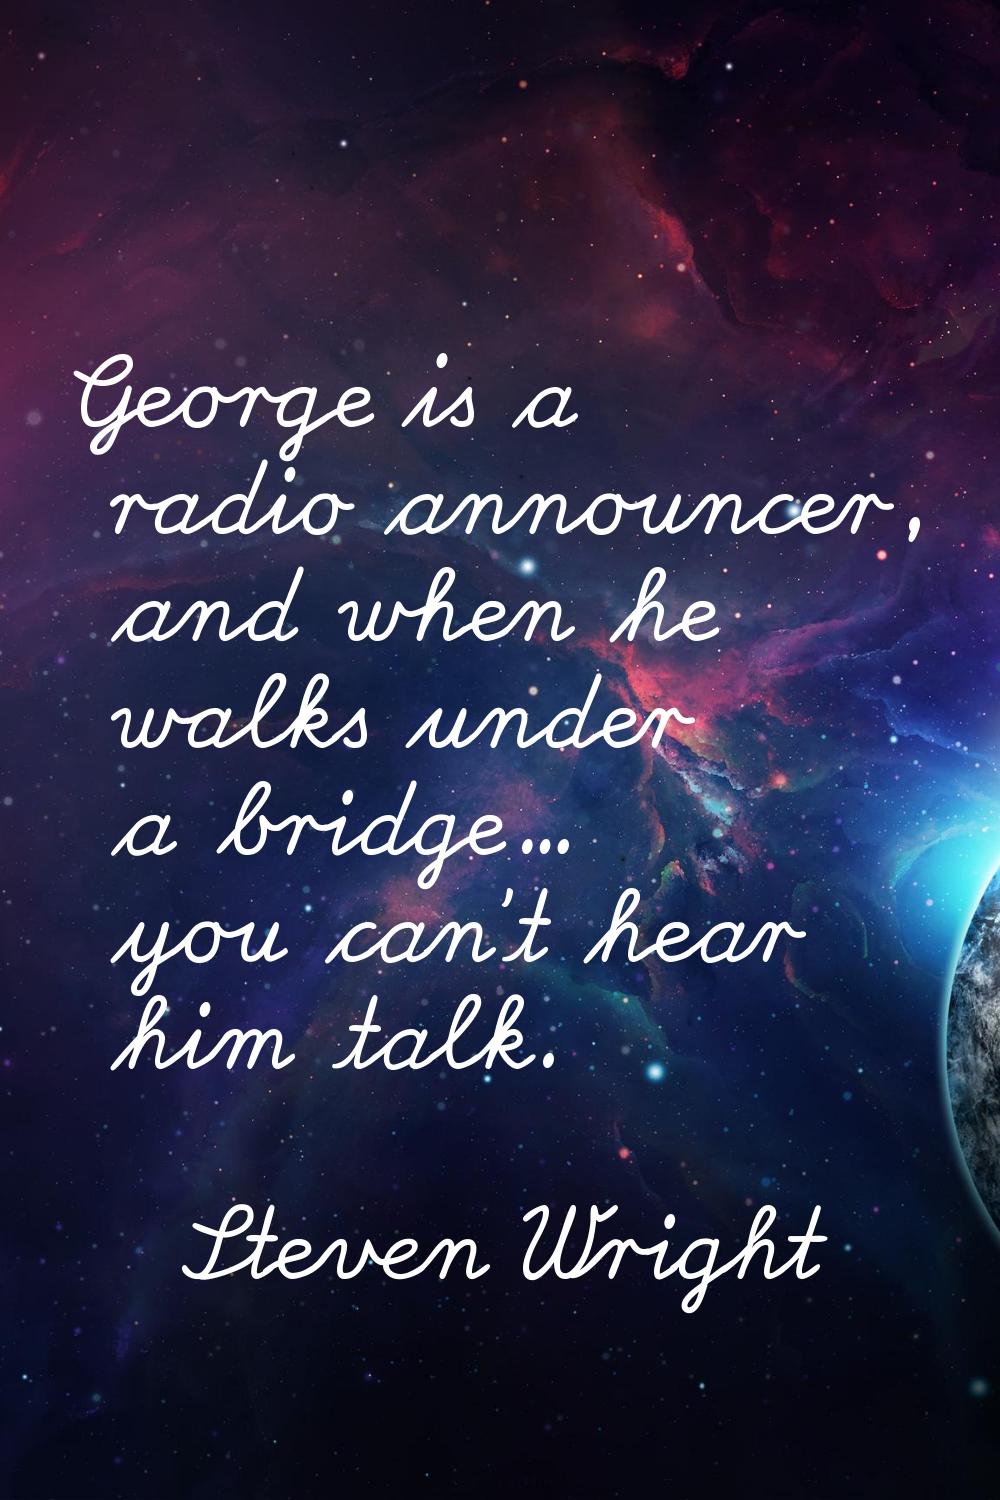 George is a radio announcer, and when he walks under a bridge... you can't hear him talk.